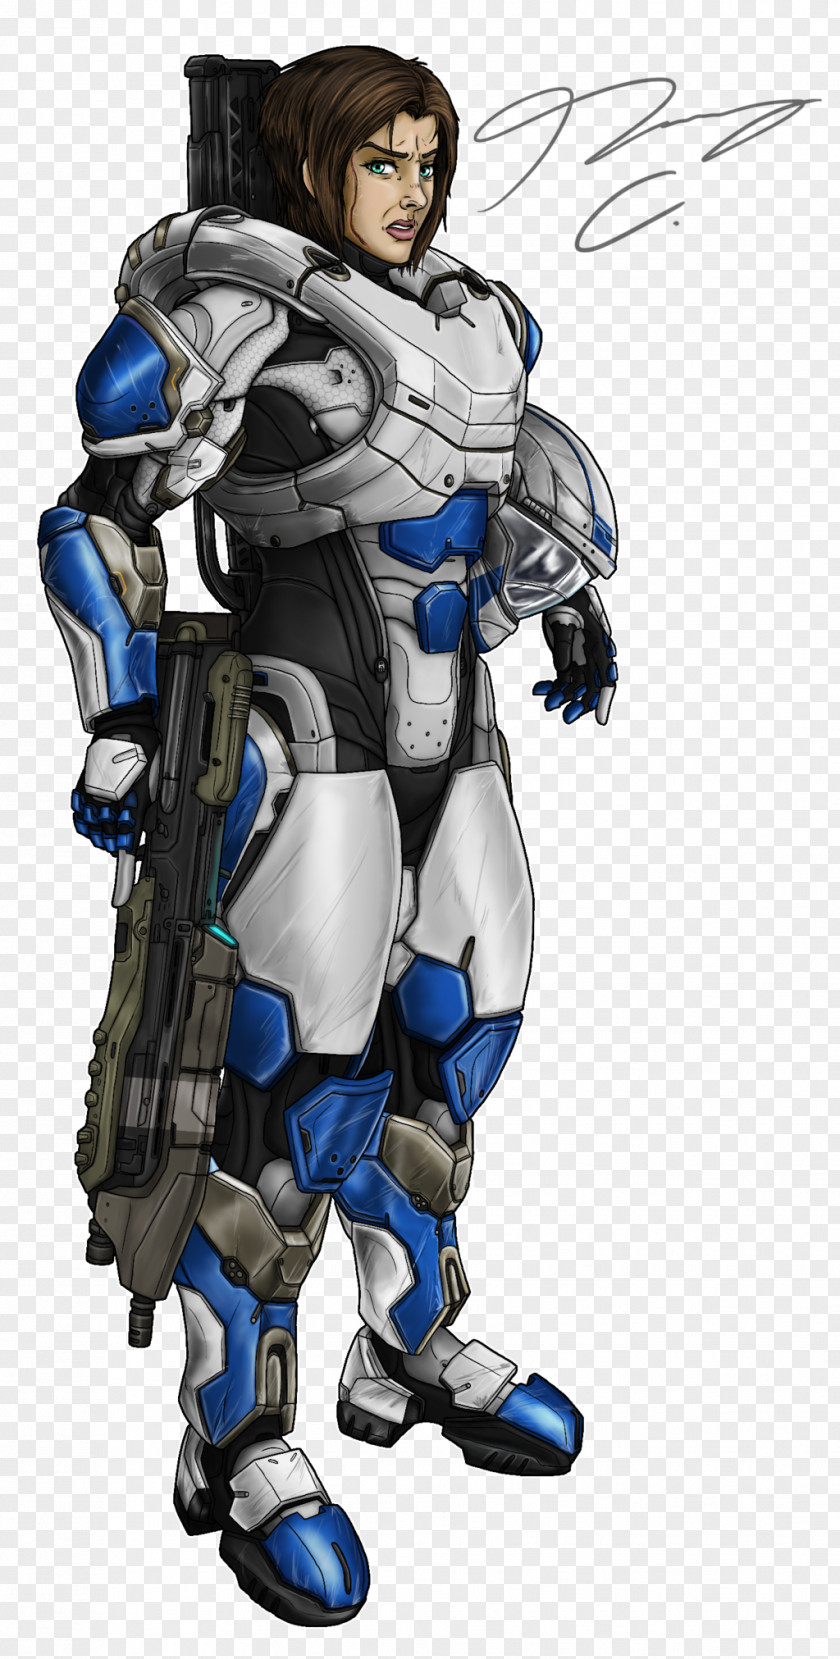 Guuver Halo 5: Guardians 4 3: ODST Spartan PNG